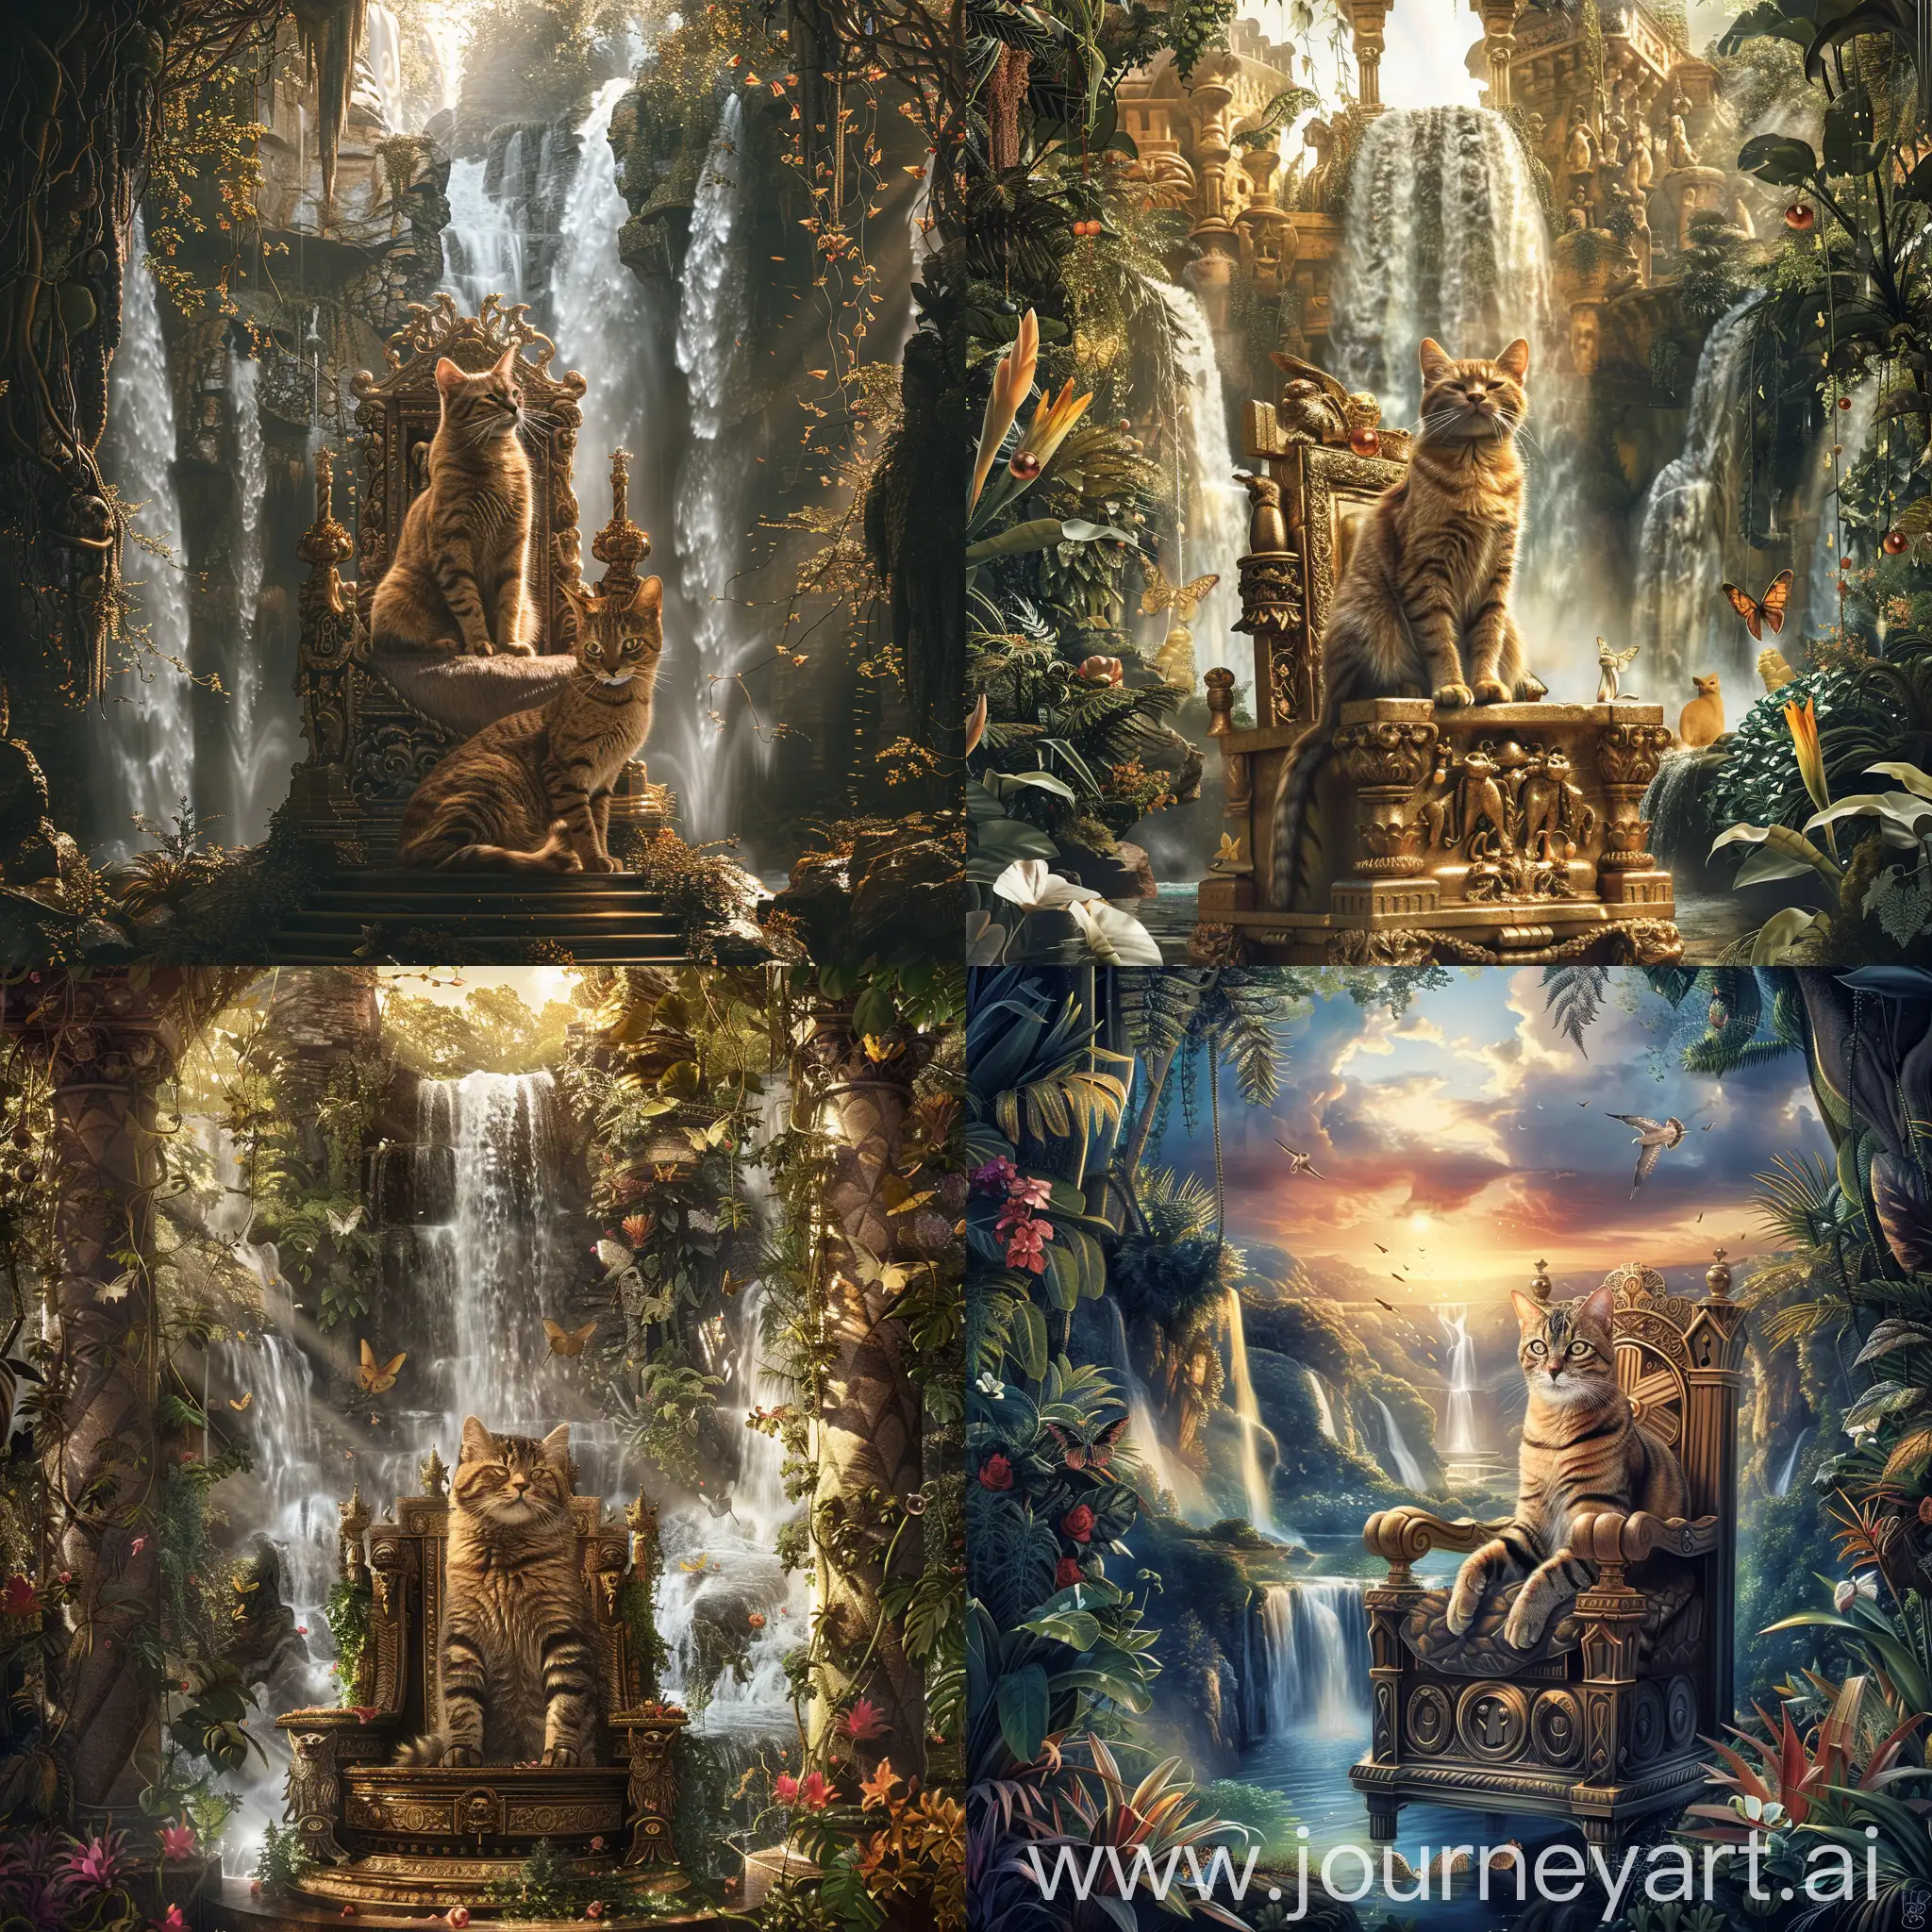 Fantasy-King-of-Cats-on-Throne-Amid-Waterfalls-in-HDR-Botanical-Wonderland